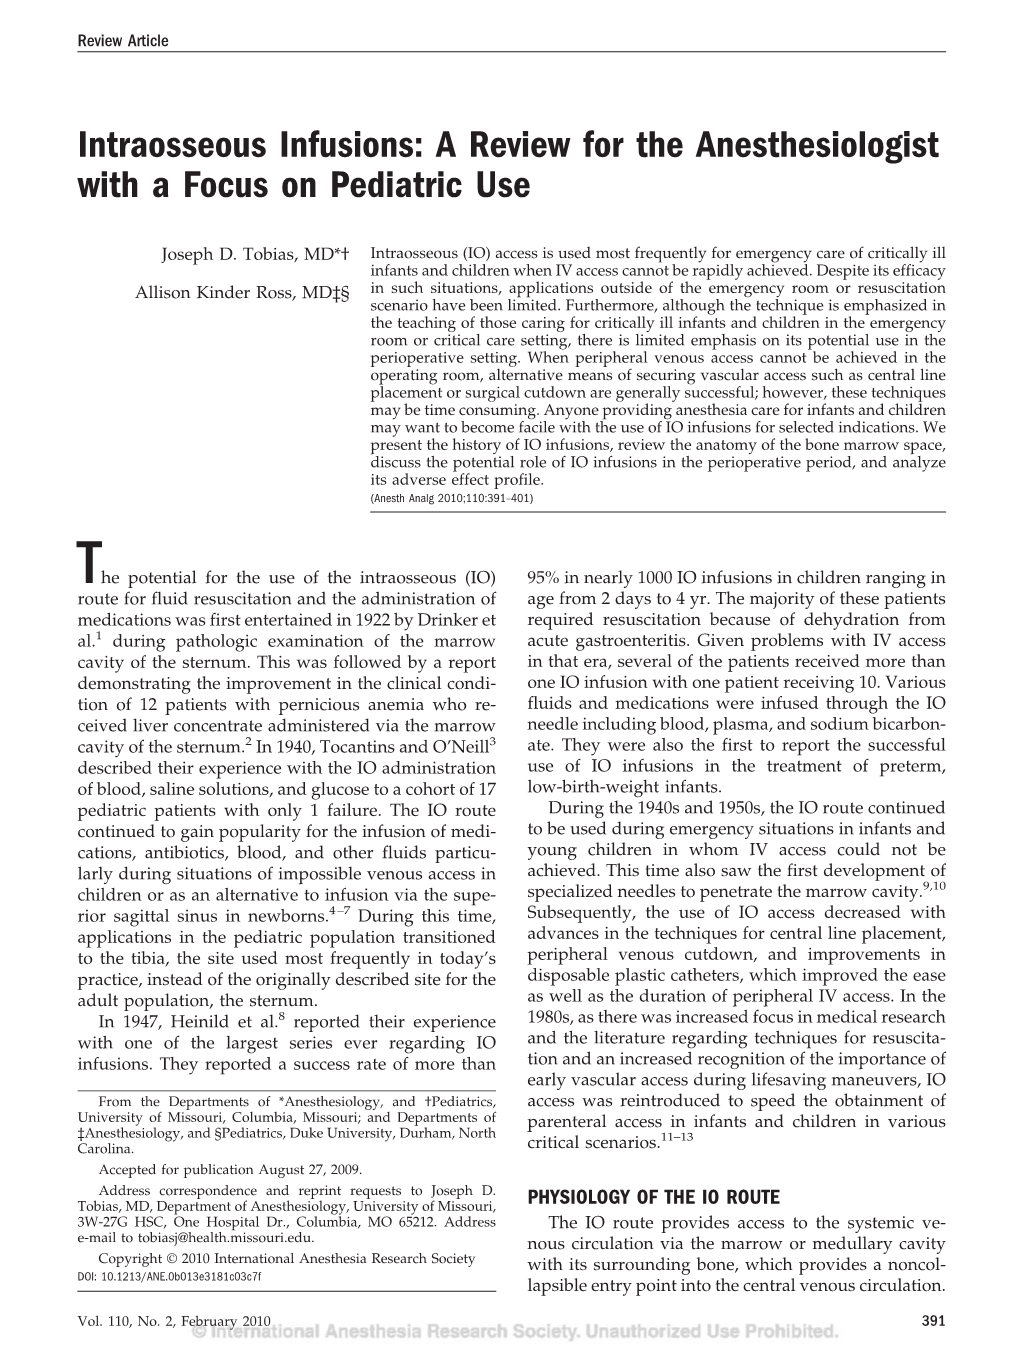 Intraosseous Infusions: a Review for the Anesthesiologist with a Focus on Pediatric Use